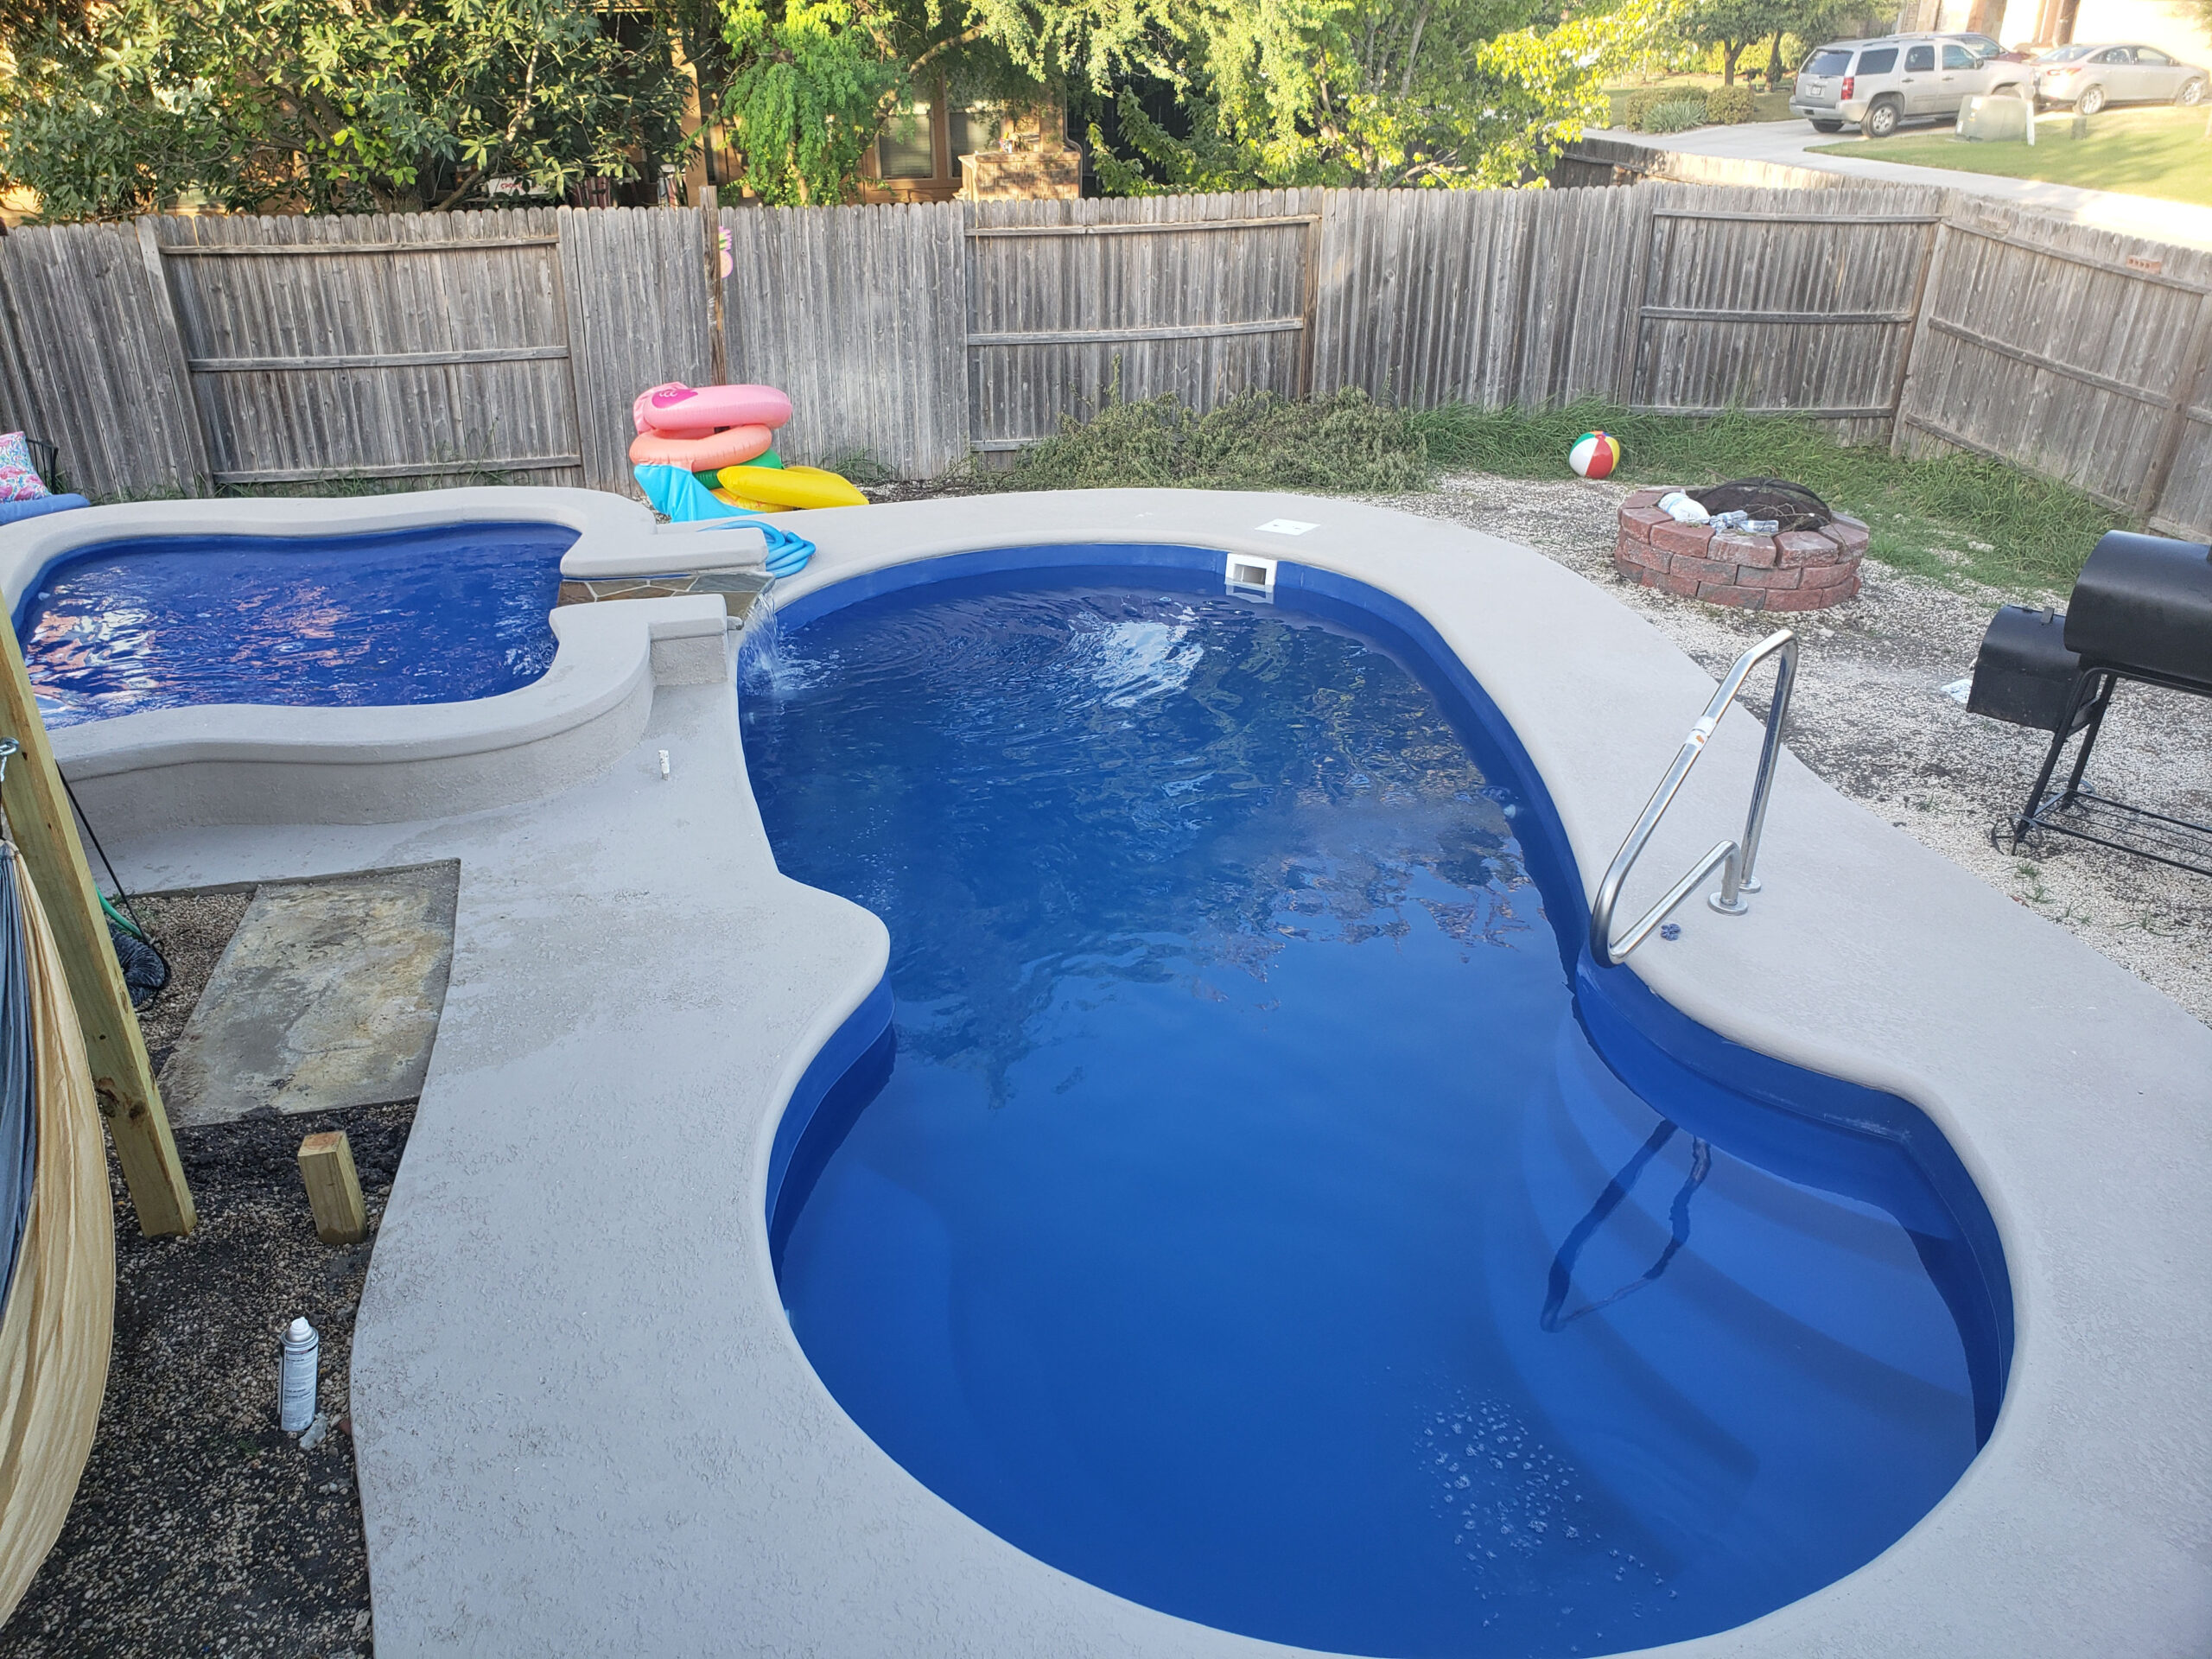 Lonestar Fiberglass Pool San Antonio Texas the builders of your private backyard Oasis and Staycation location without leaving town